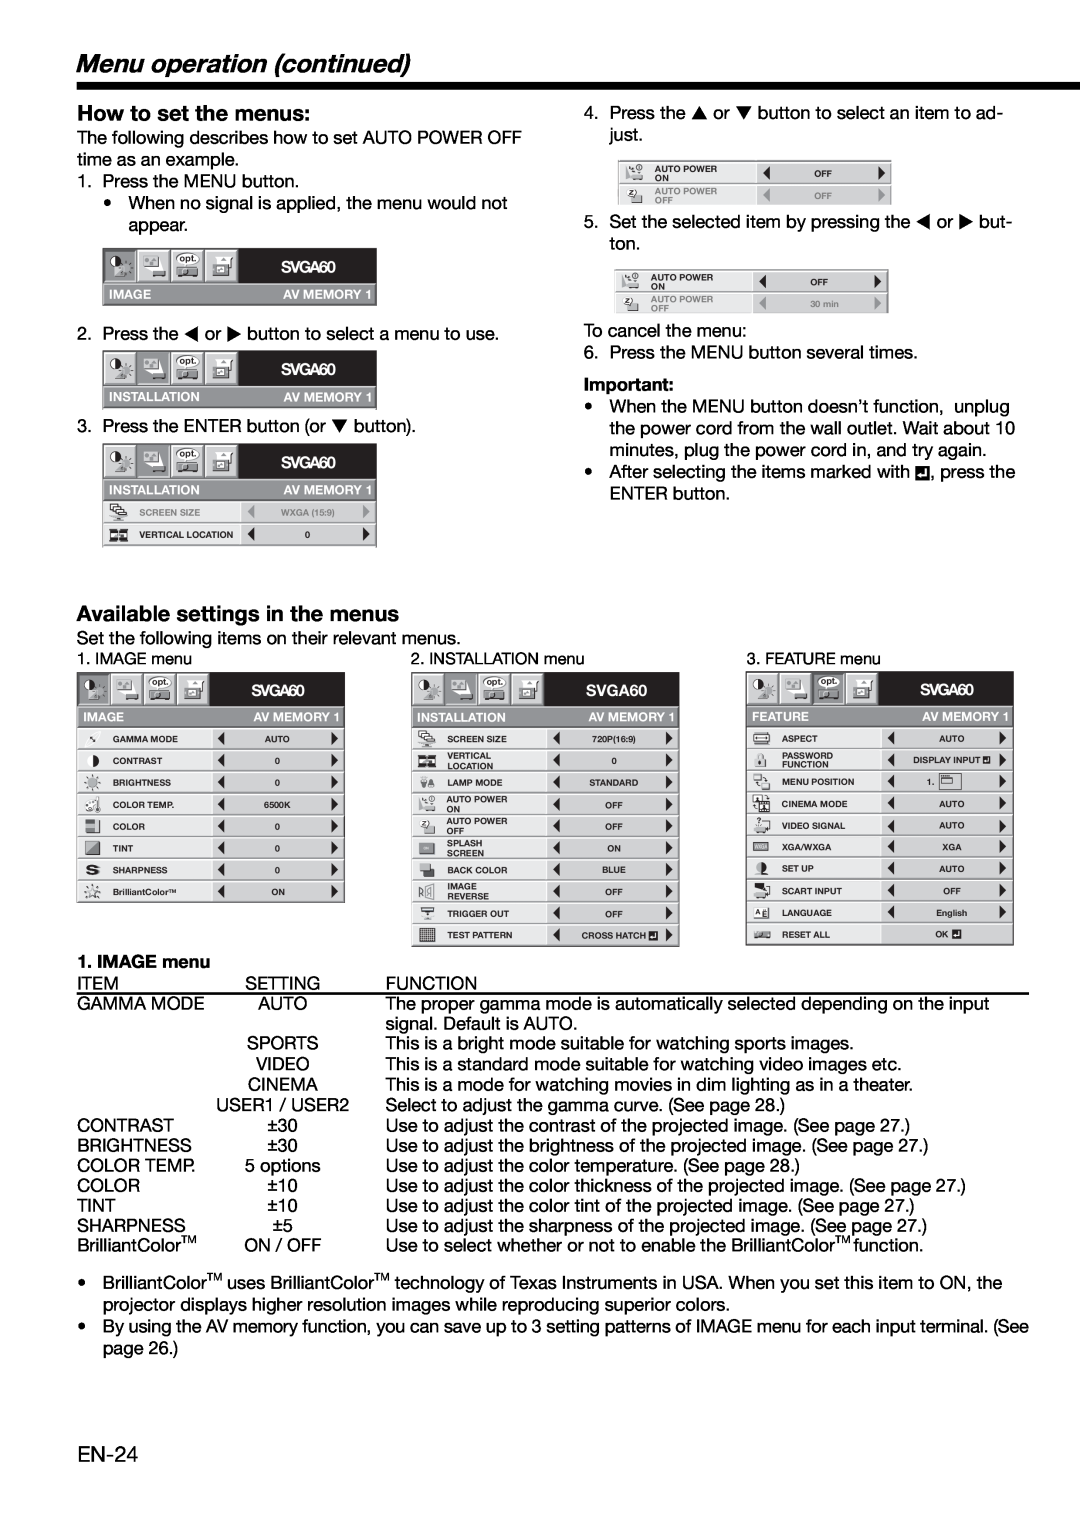 Mitsubishi Electronics HC3000 Menu operation continued, How to set the menus, Available settings in the menus, IMAGE menu 